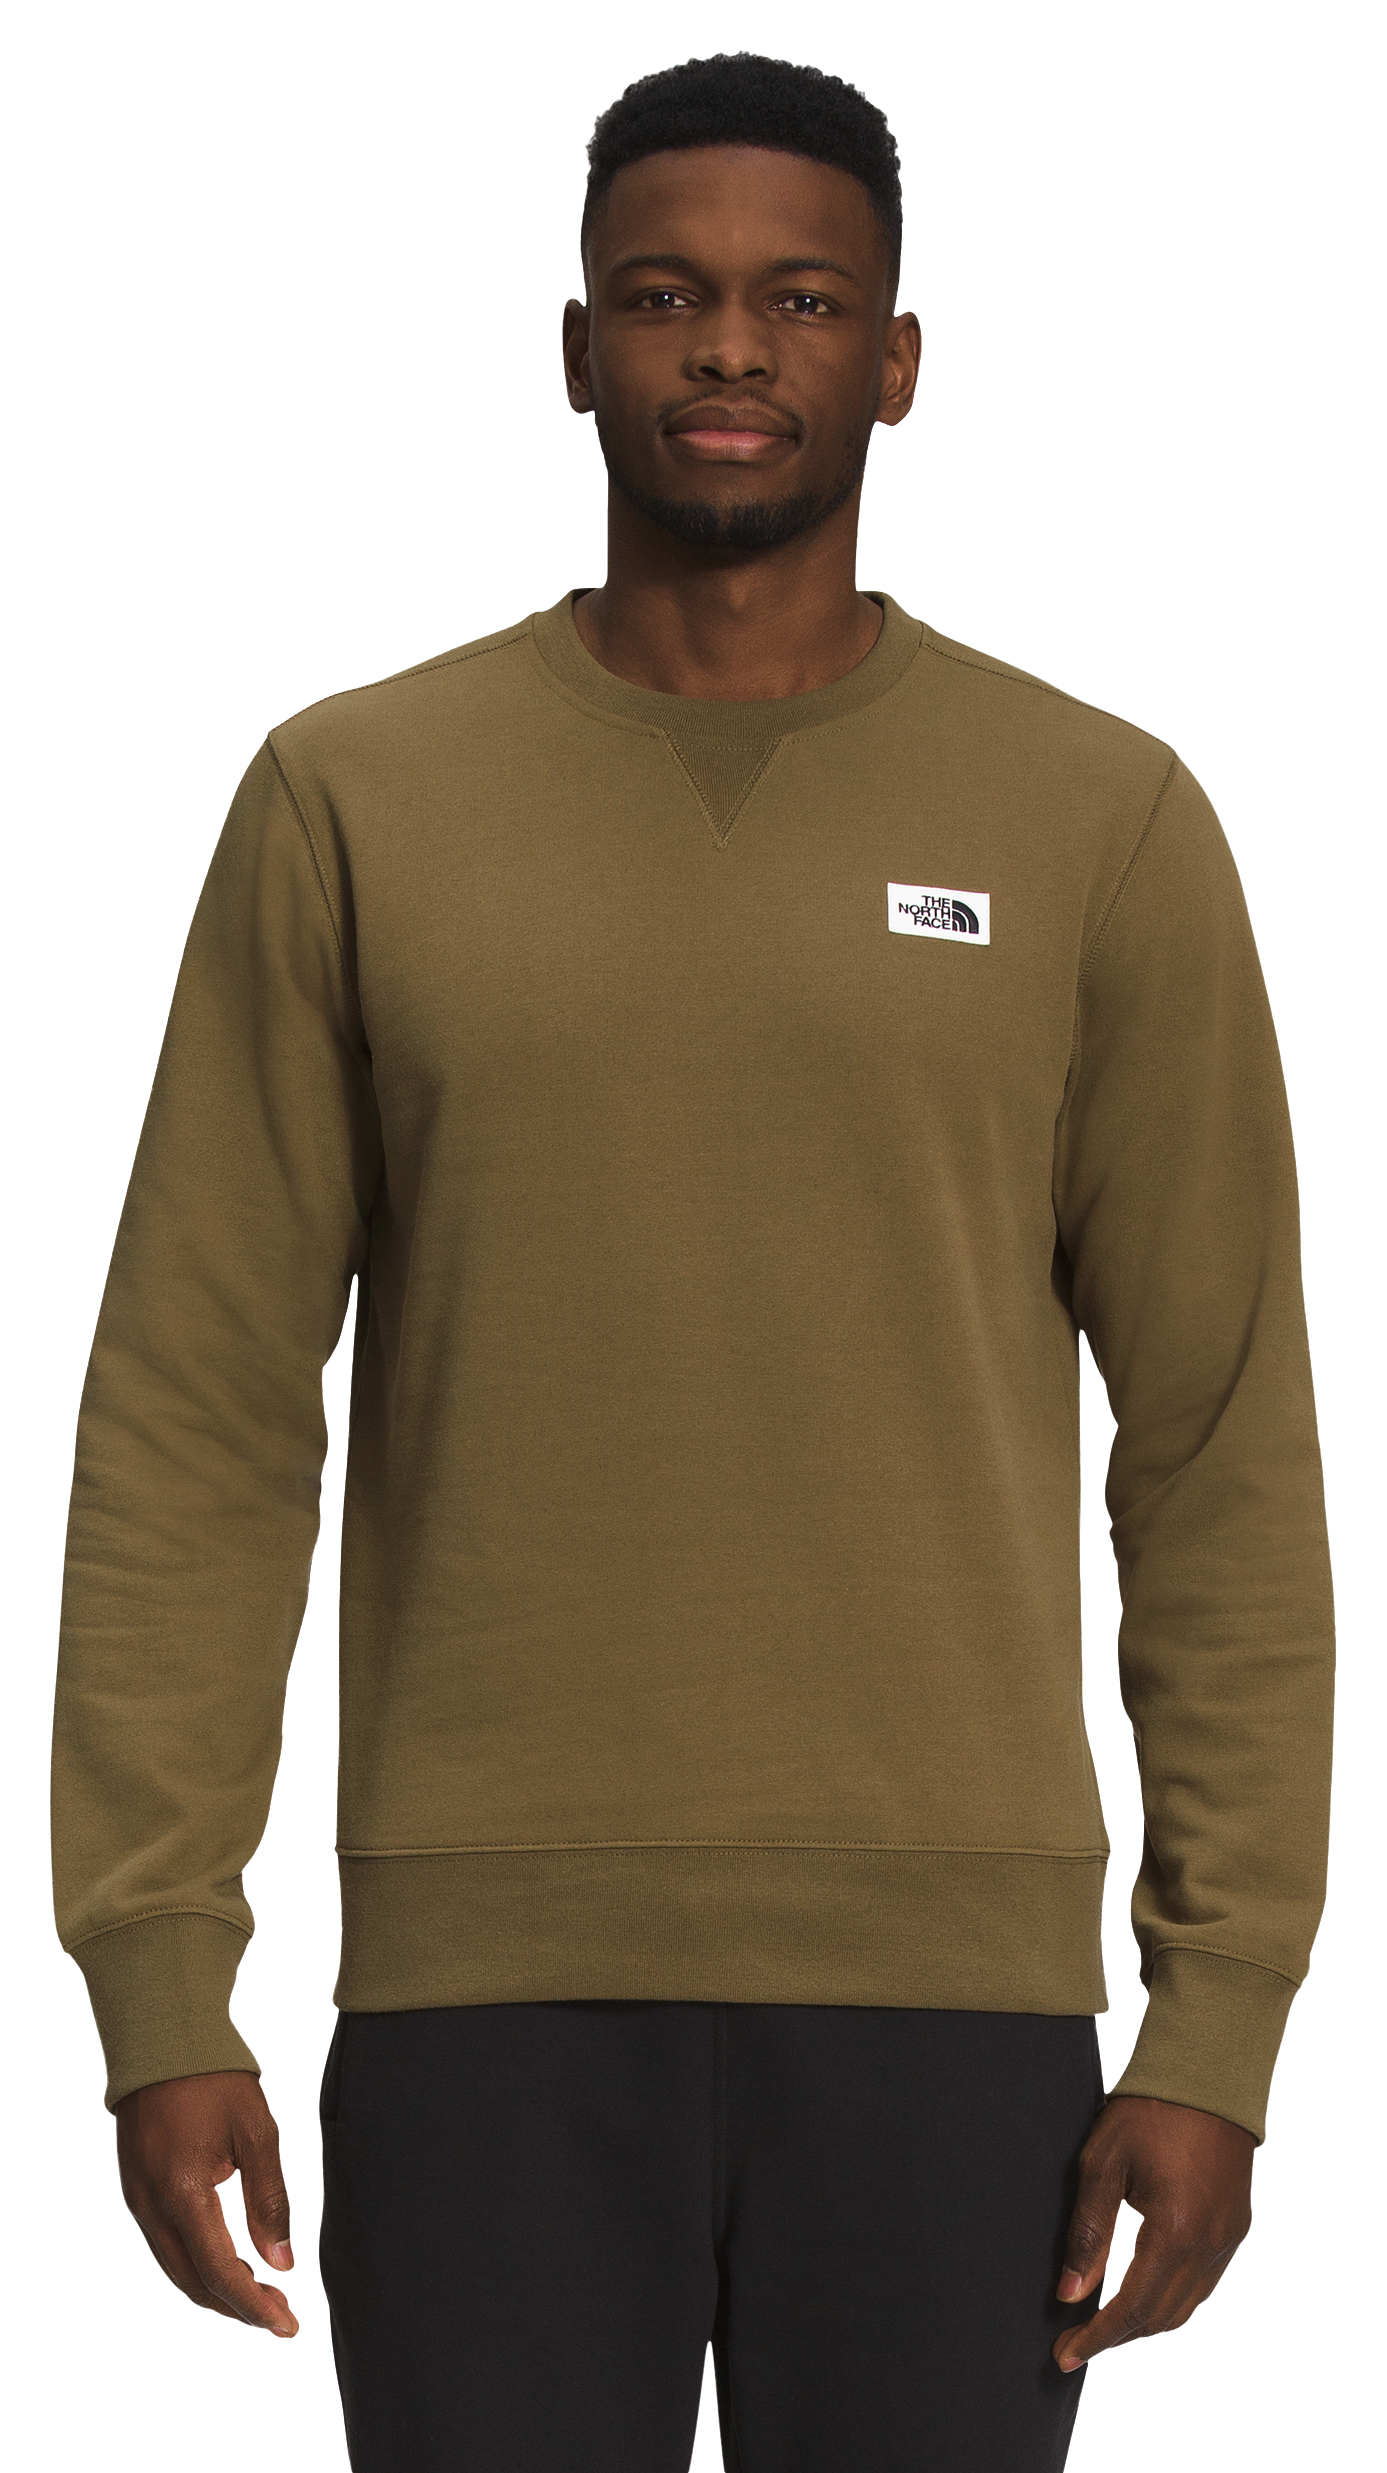 The North Face Heritage Patch Long-Sleeve Crew for Men - Military Olive - S